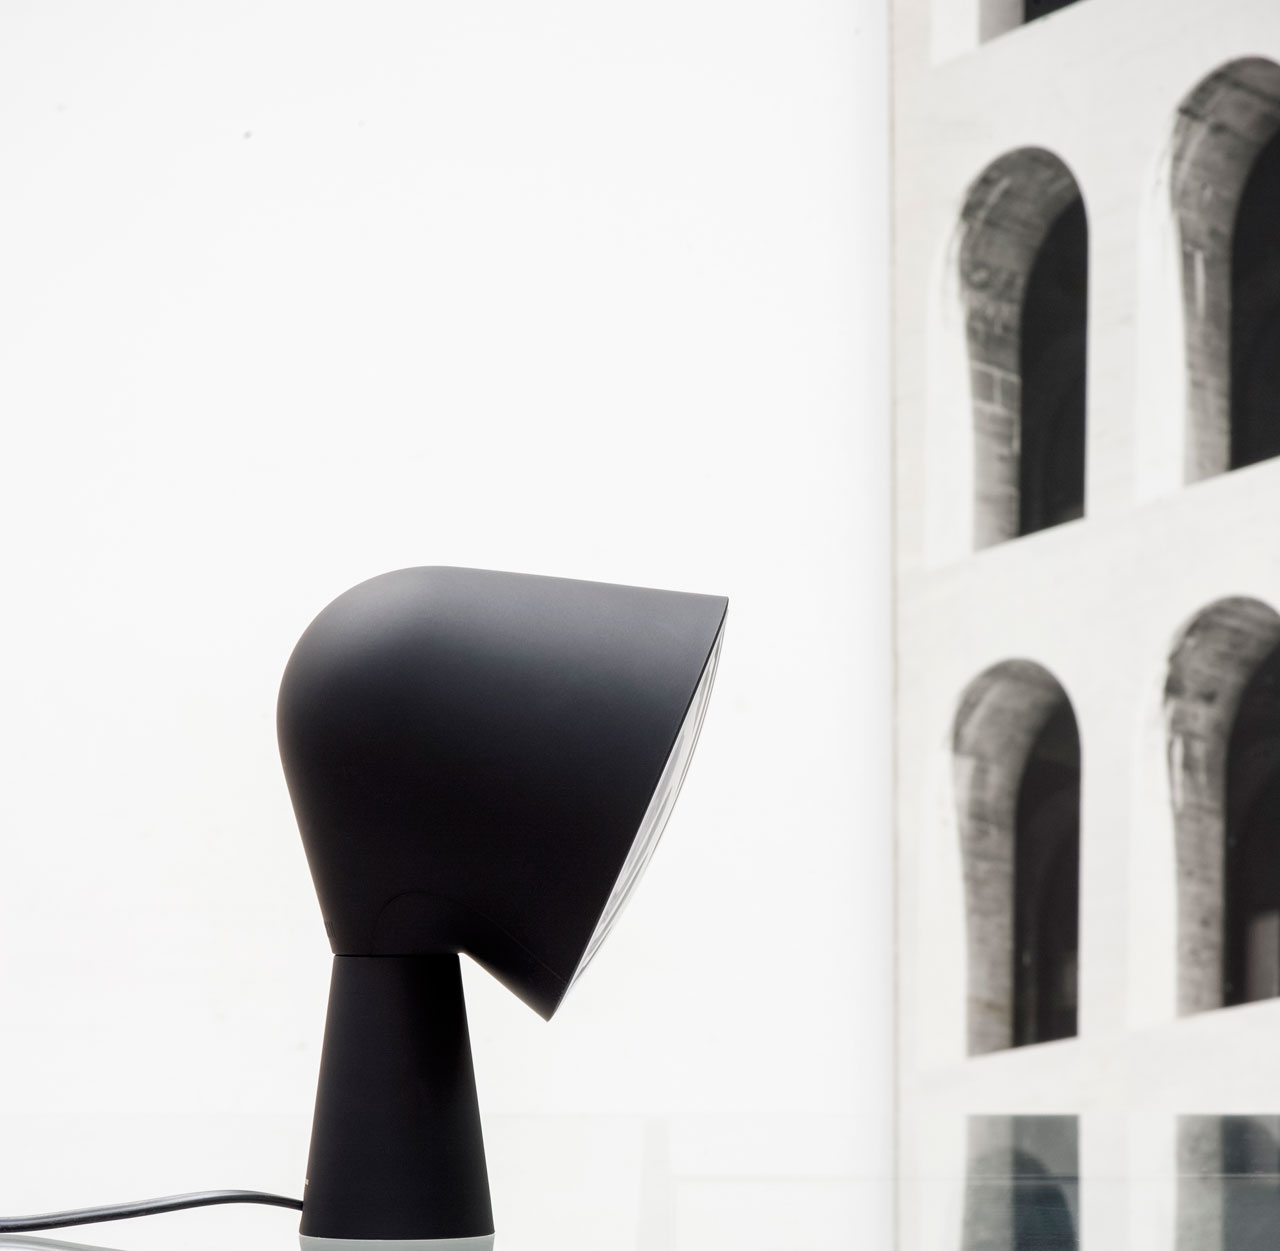 BLACK BINIC table lamp by Ionna Vautrin for FOSCARINI , limited edition for the 10 by Yatzer debut collection/ Batch-dyed polycarbonate and ABS / 14 cm W x 20 cm H, 14 cm depth / Edition of 100. Styling by Costas Voyatzis, photo by Fabrizio Annibali.